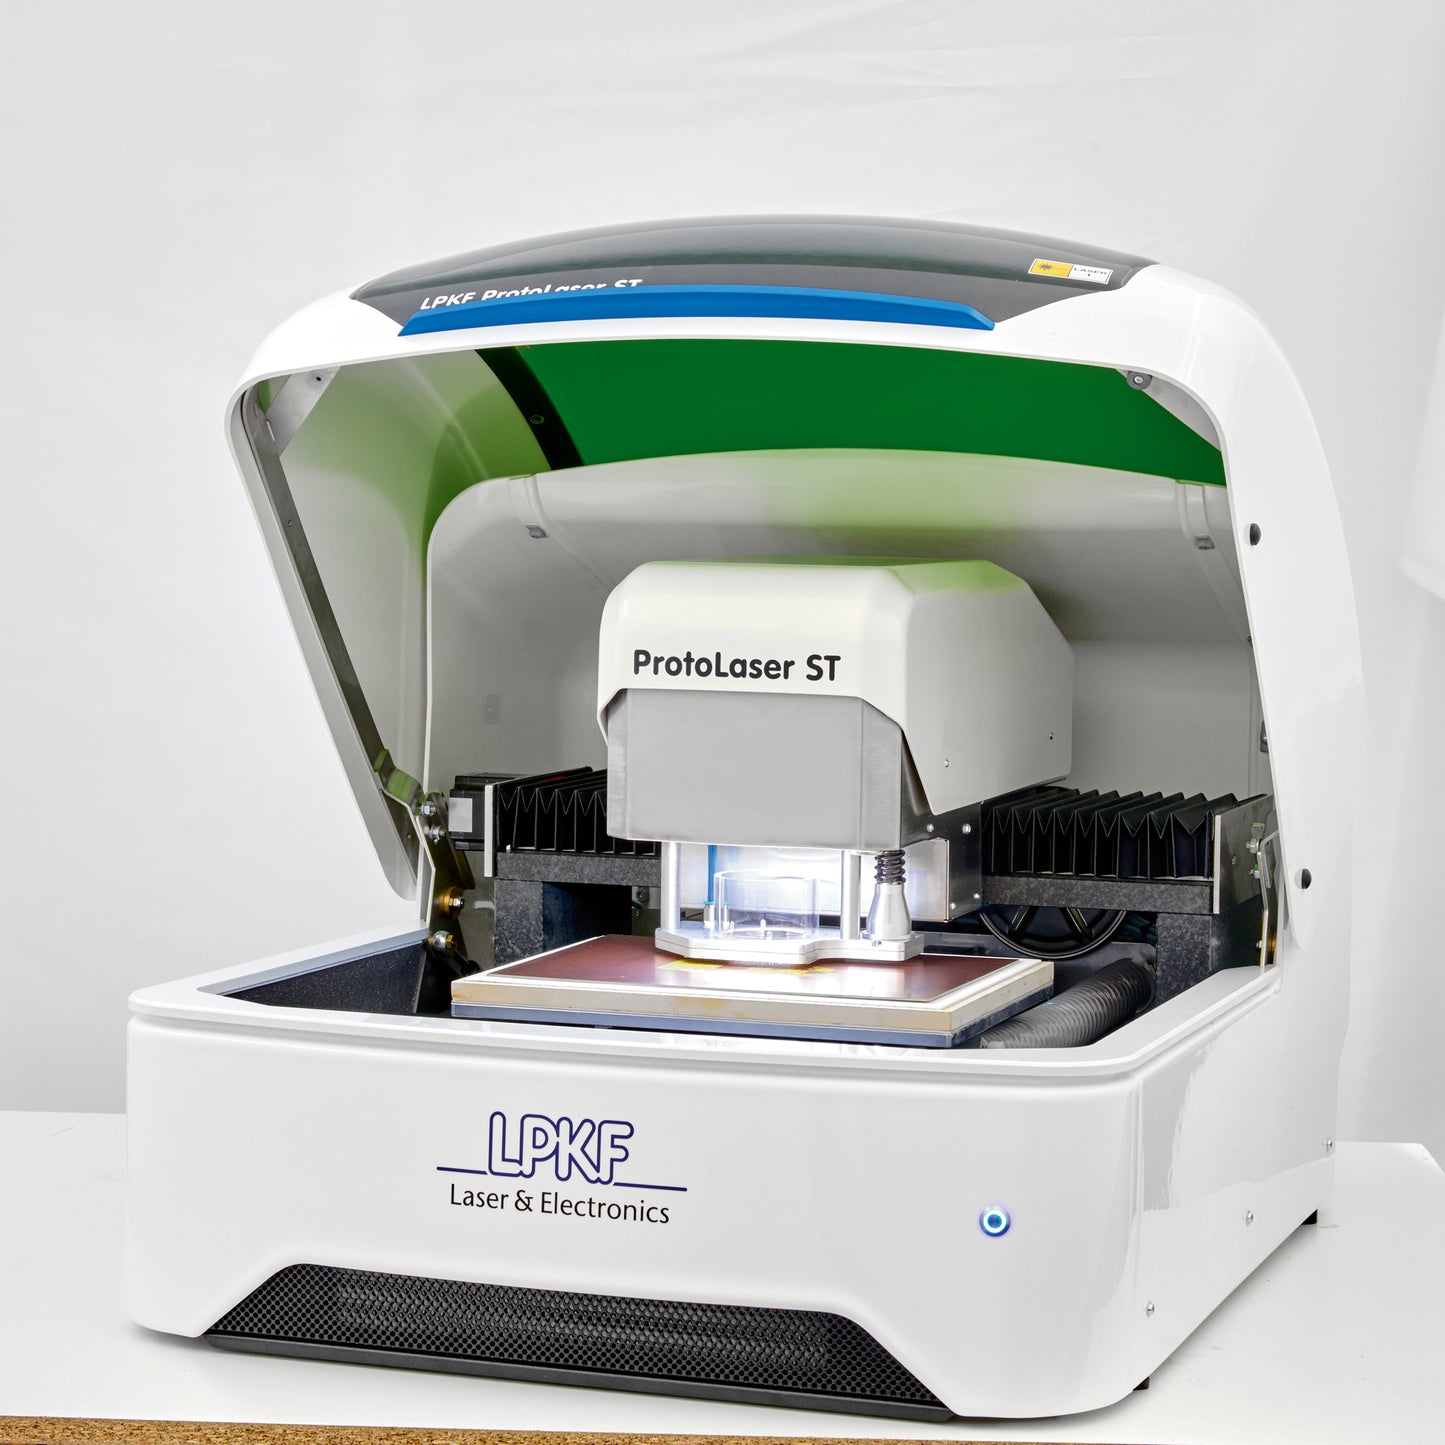 Tabletop Laser System LPKF ProtoLaser ST. The laboratory system for processing FR4 as well as sensitive RF materials convinces with high performance. In its compact tabletop format, it can be used in any laboratory.